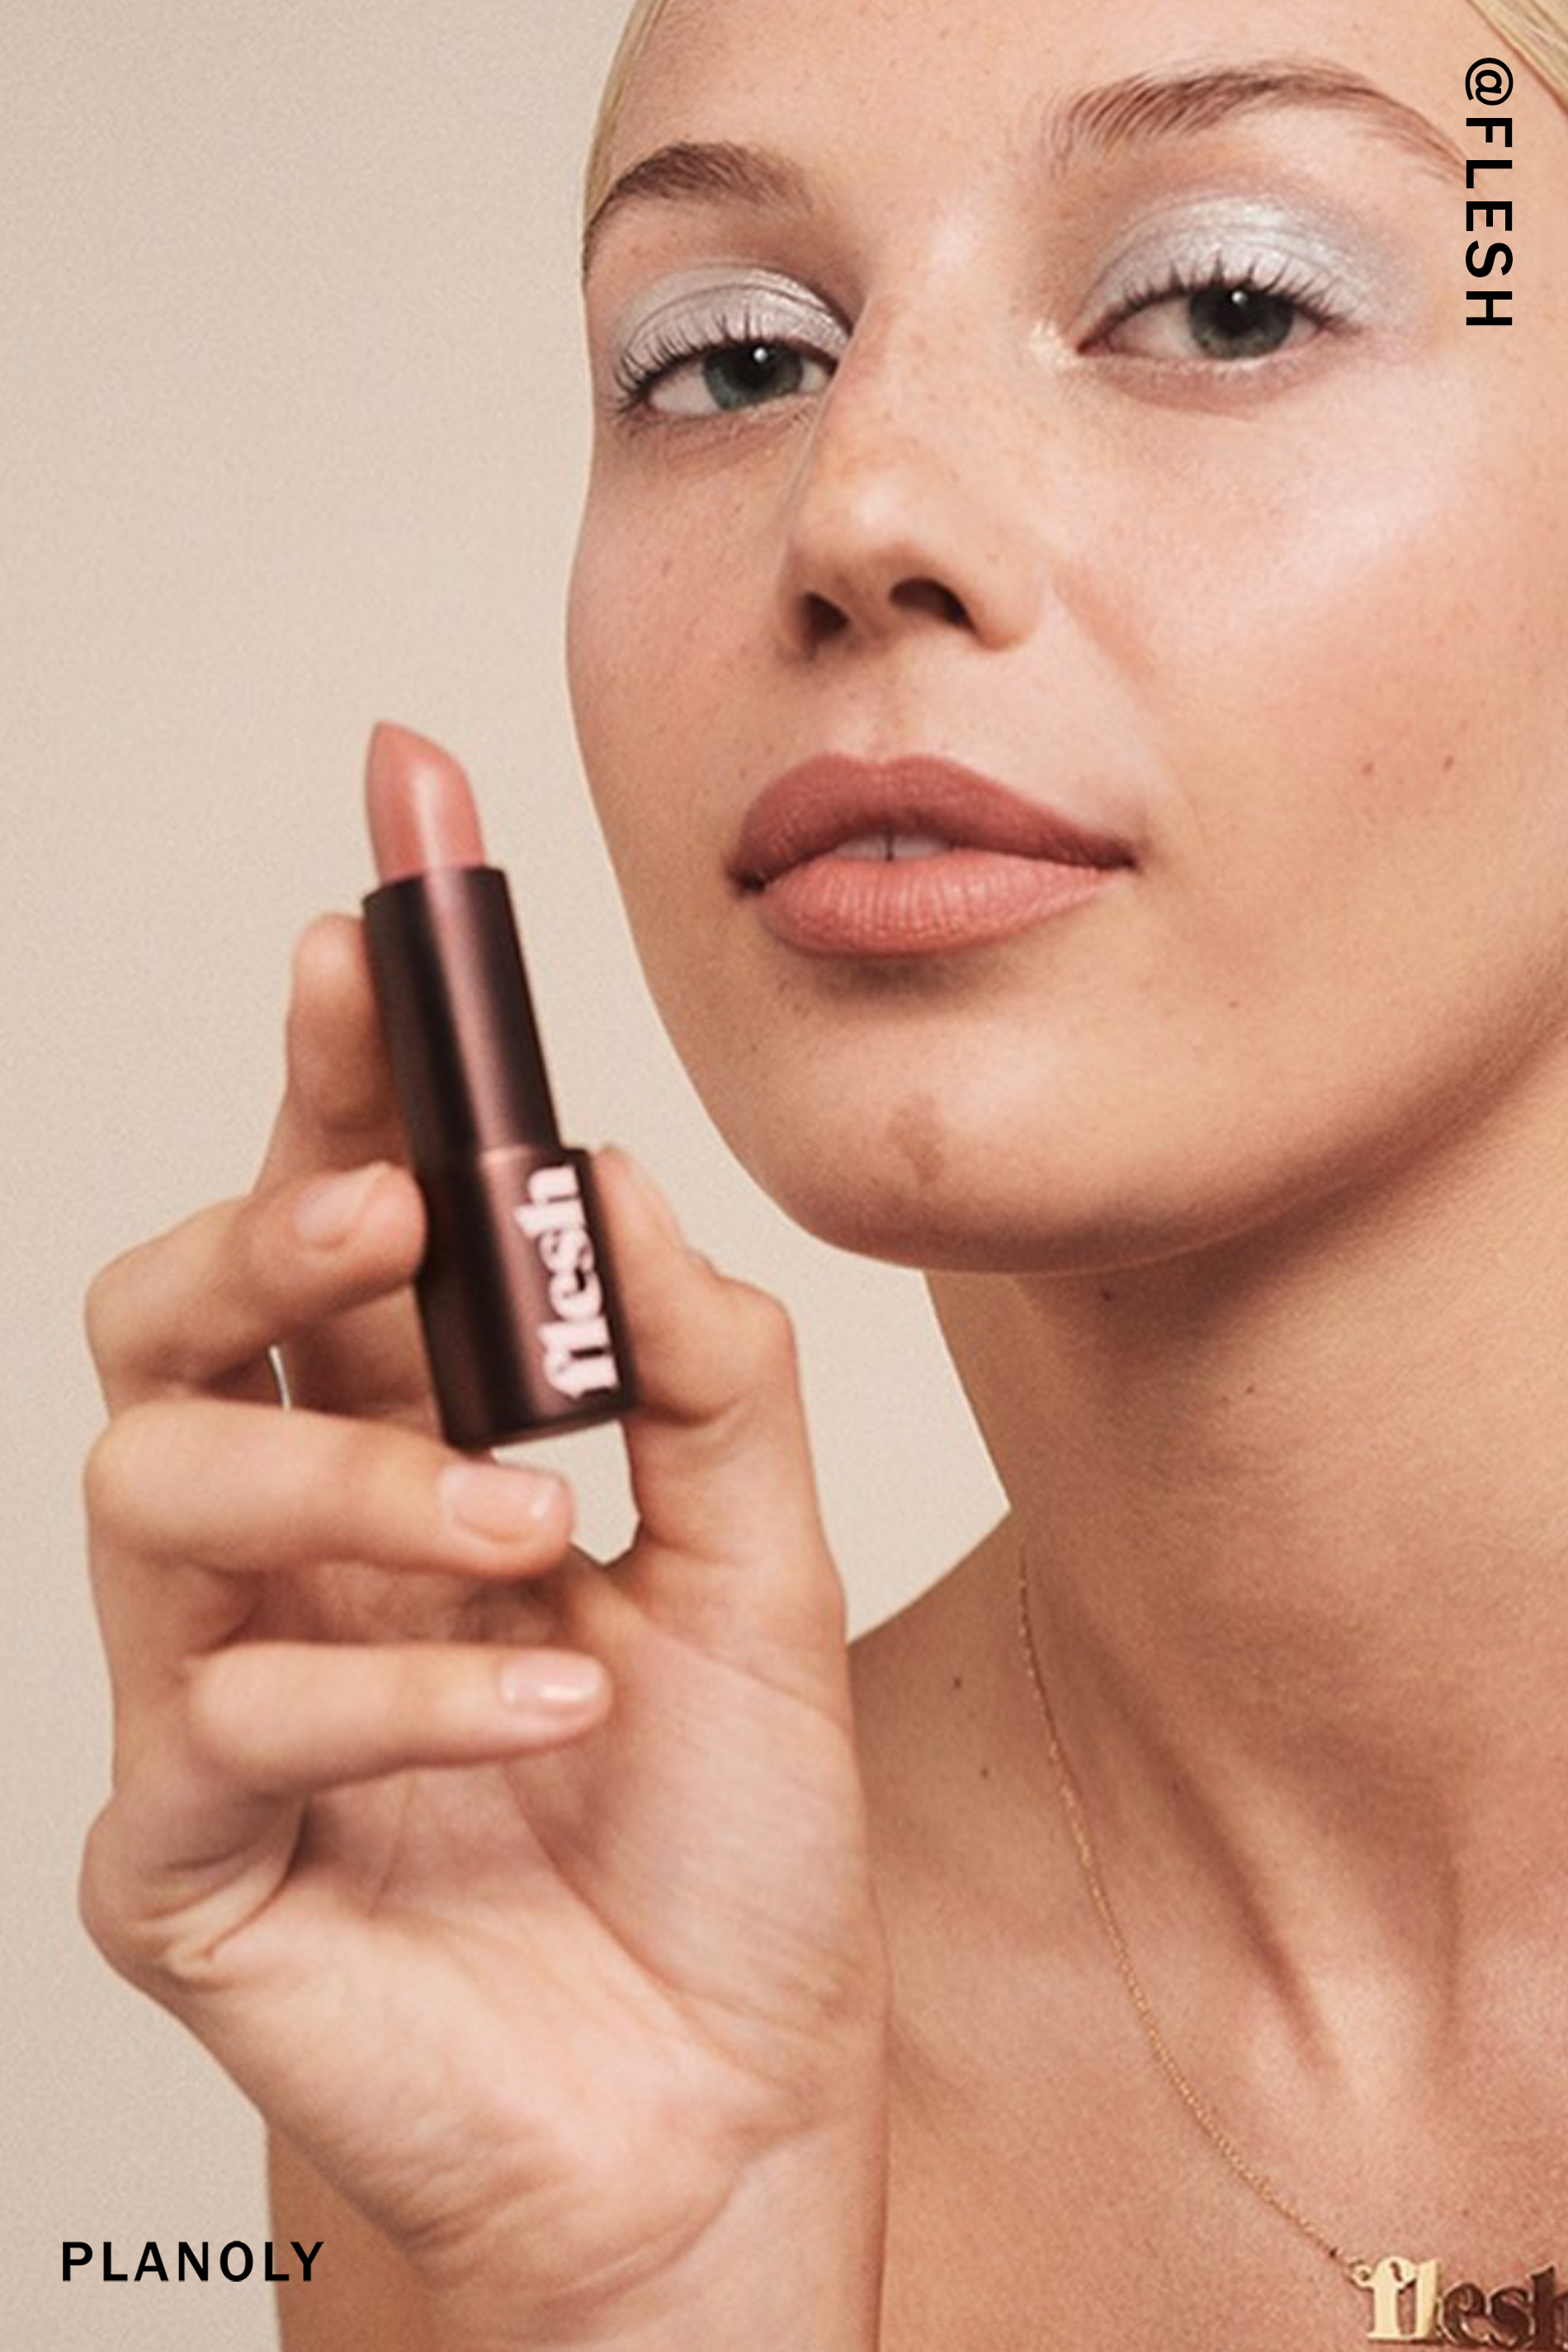 Flesh Beauty on Humanizing its Brand and the Power of User-Generated Content